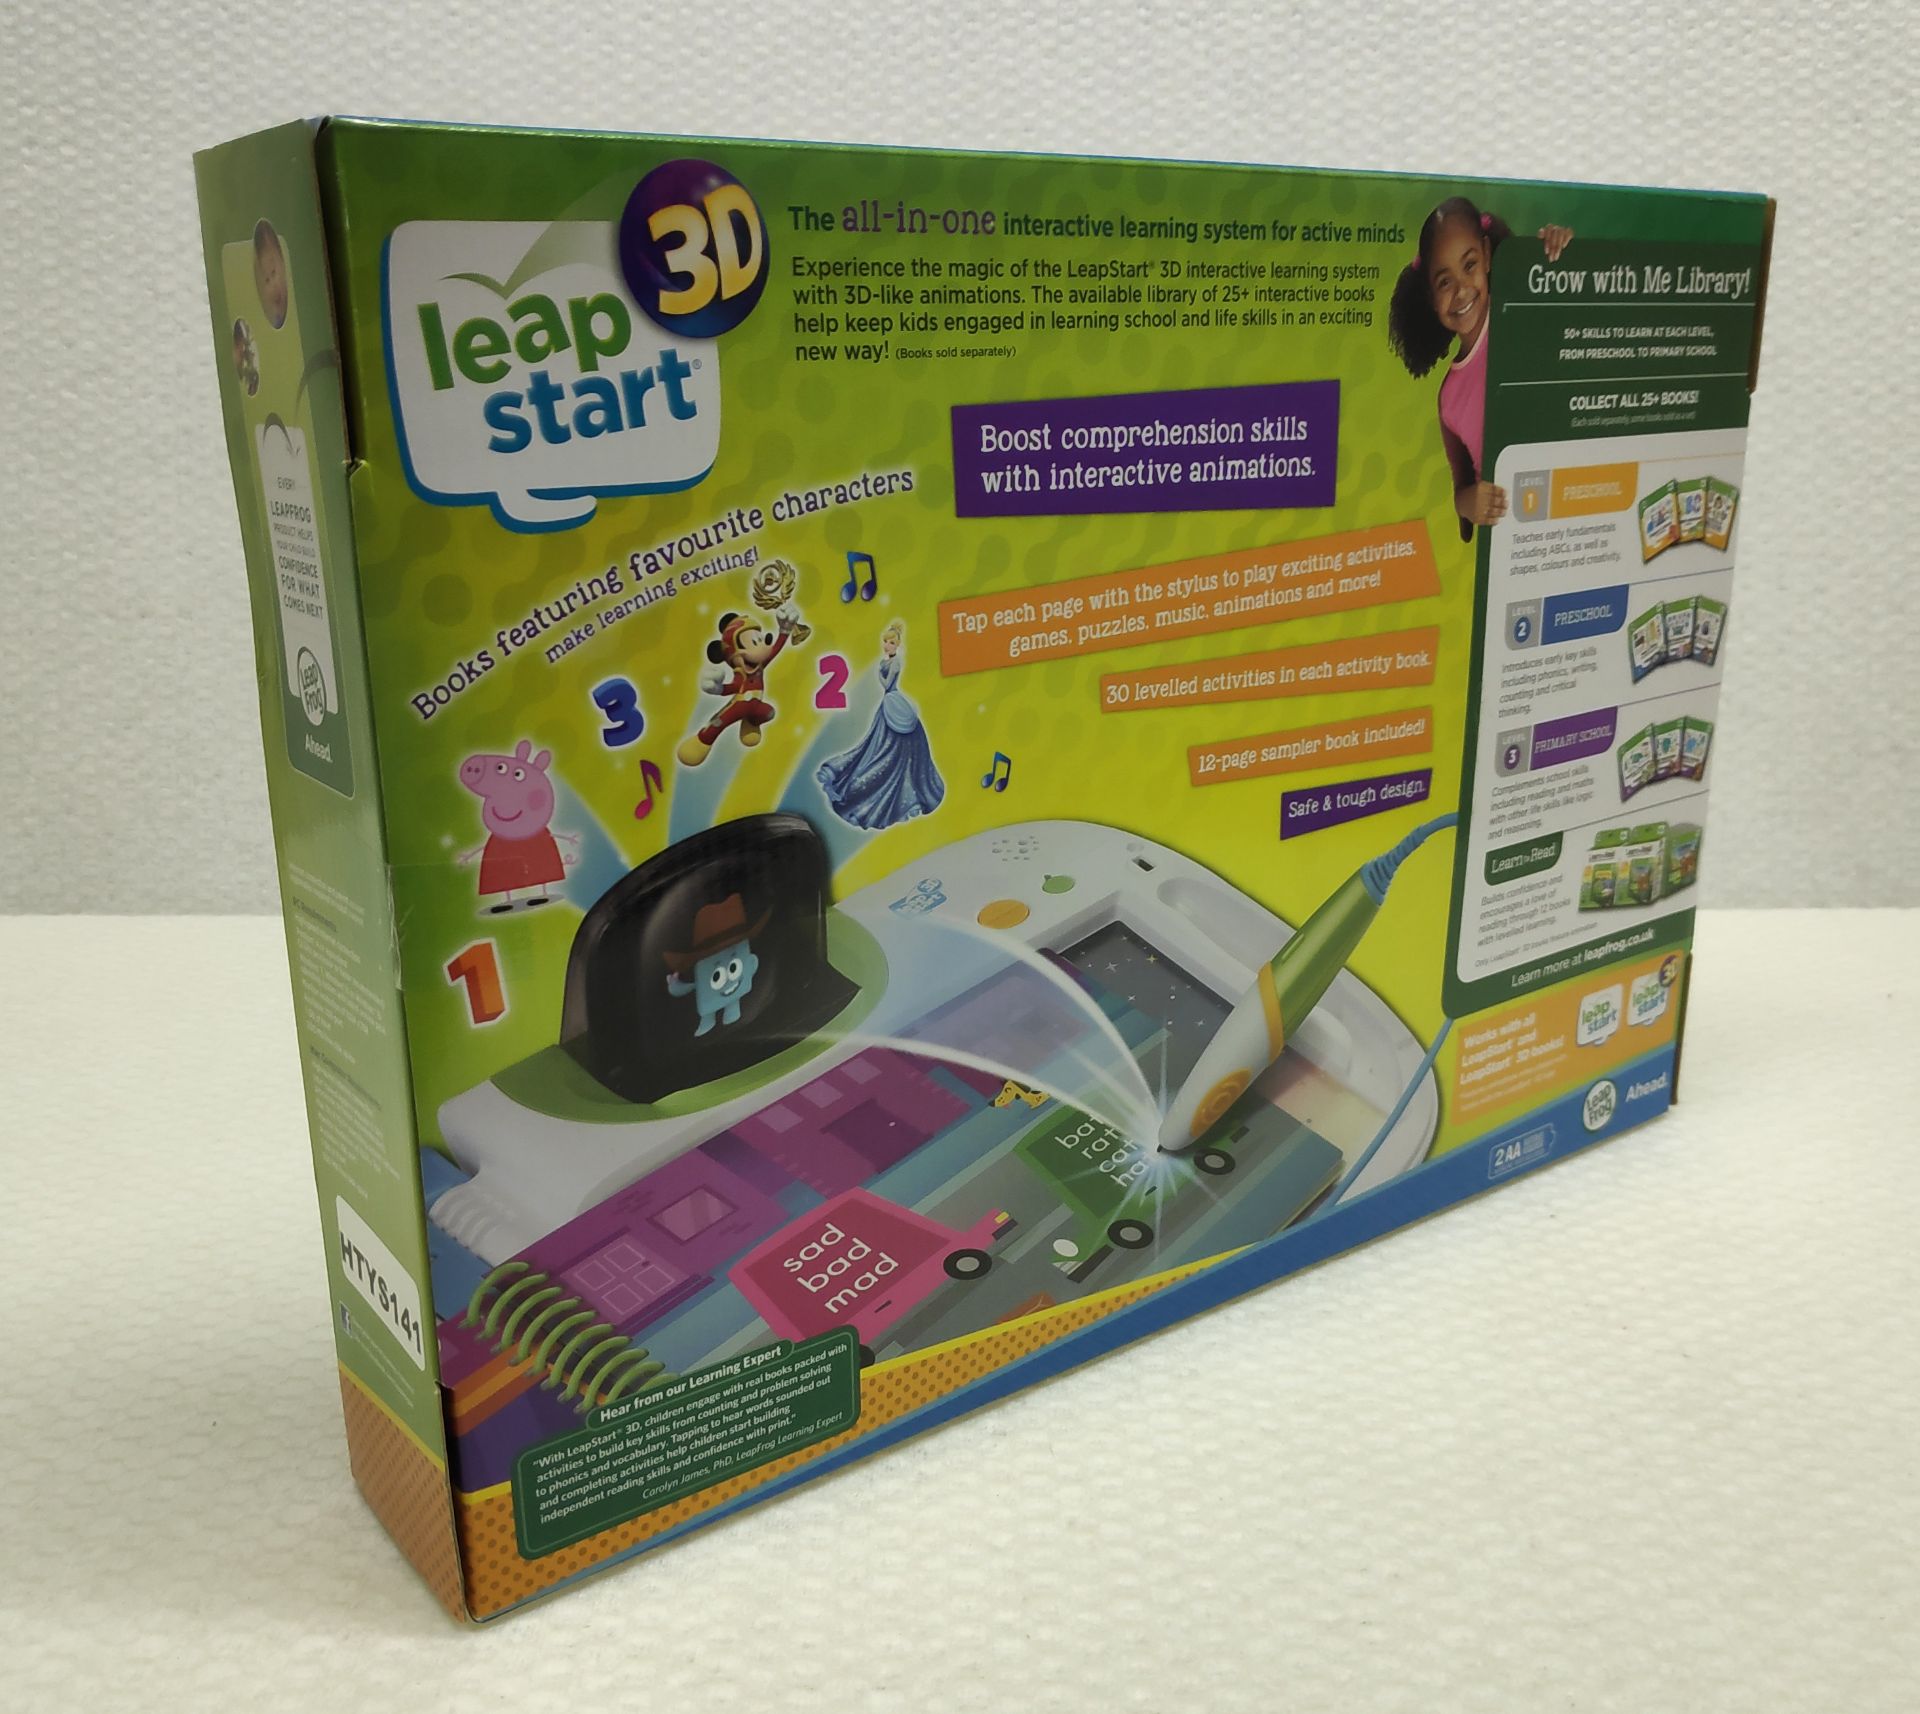 1 x LeapFrog LeapStart 3D Interactive Learing System - New/Boxed - Image 6 of 6